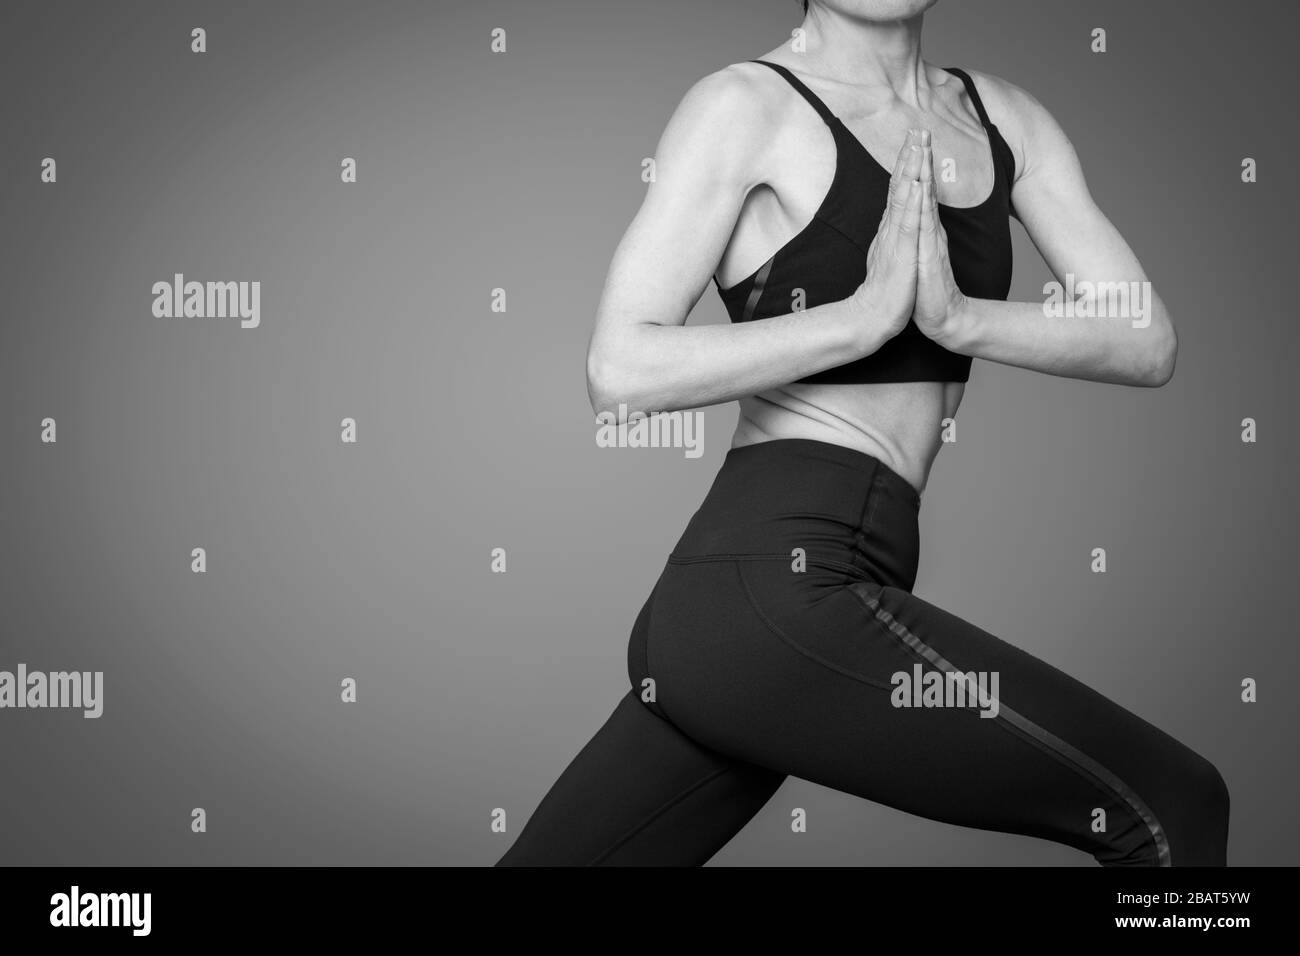 close up of a slim woman practicing yoga, warrior one pose with twist. Balck & white. Stock Photo